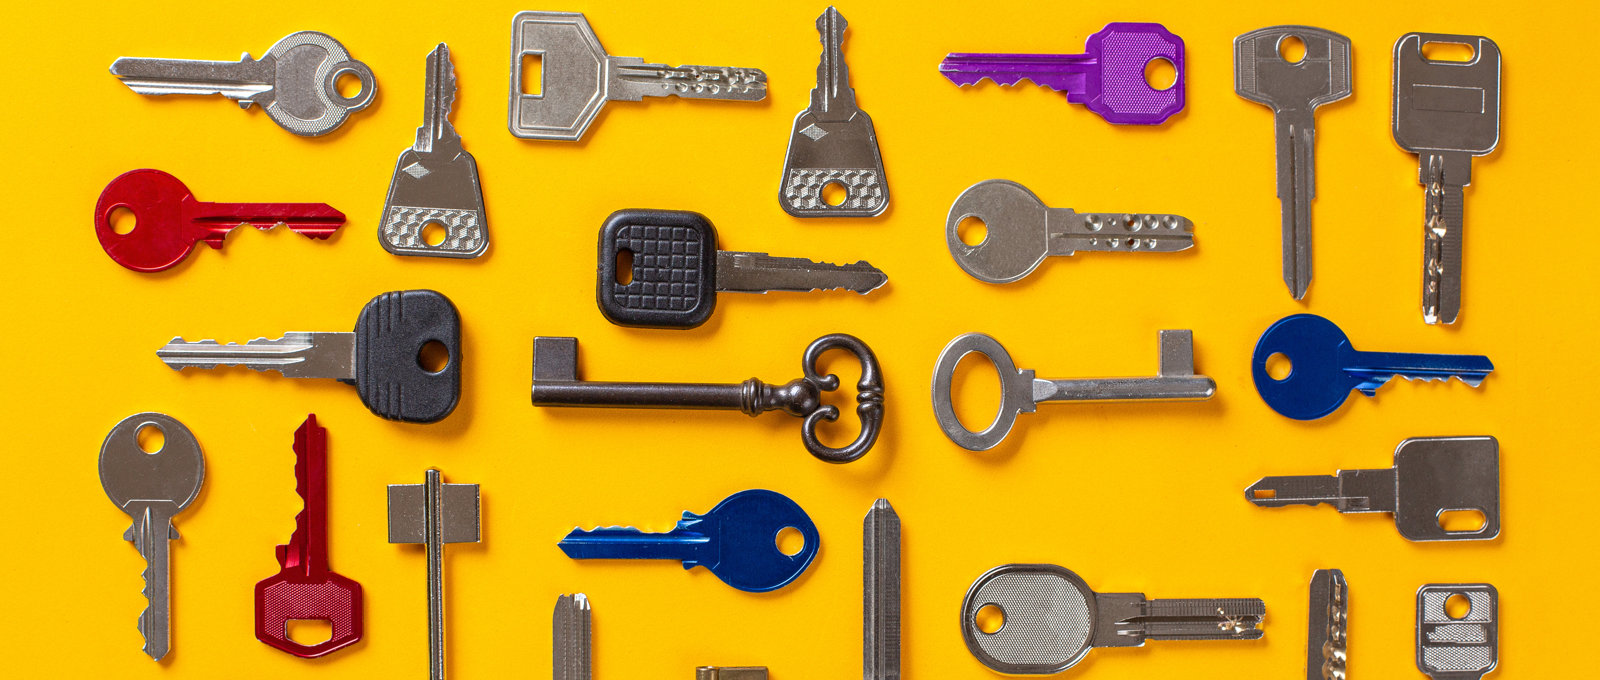 photo of lots of different keys, in different orientations, laid out on a yellow surface